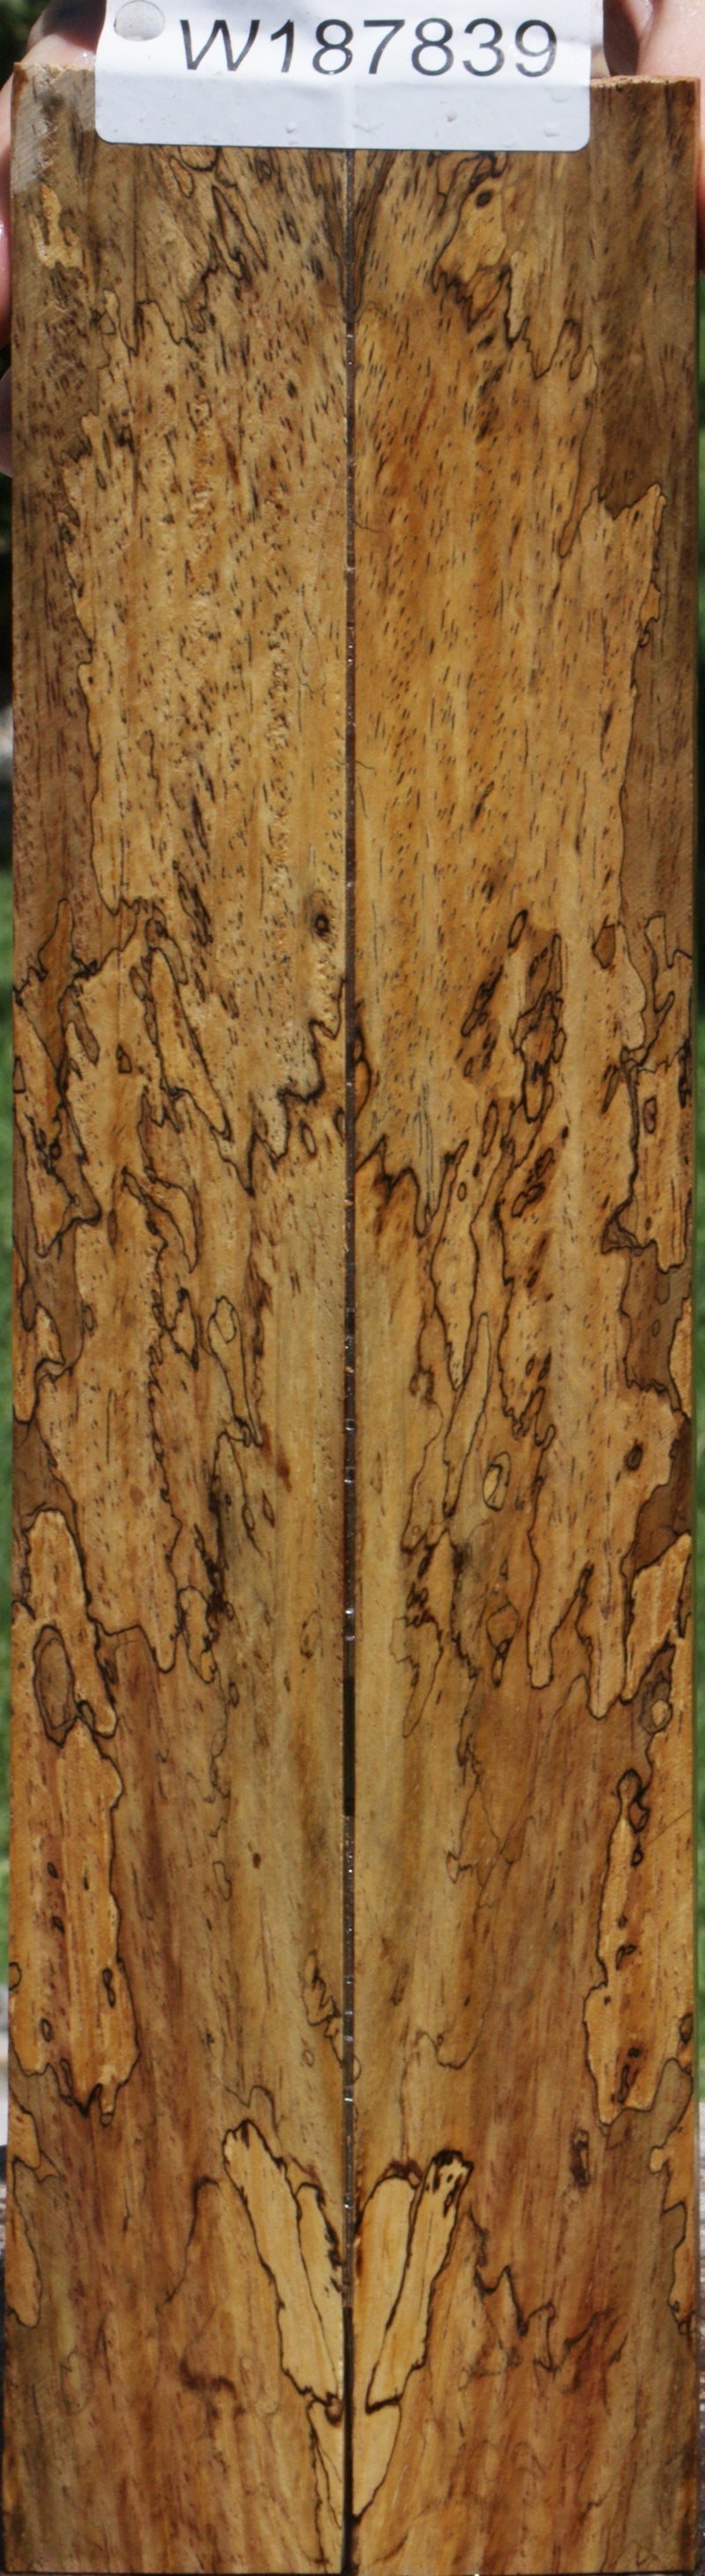 Spalted Cocobolo Knife Scales